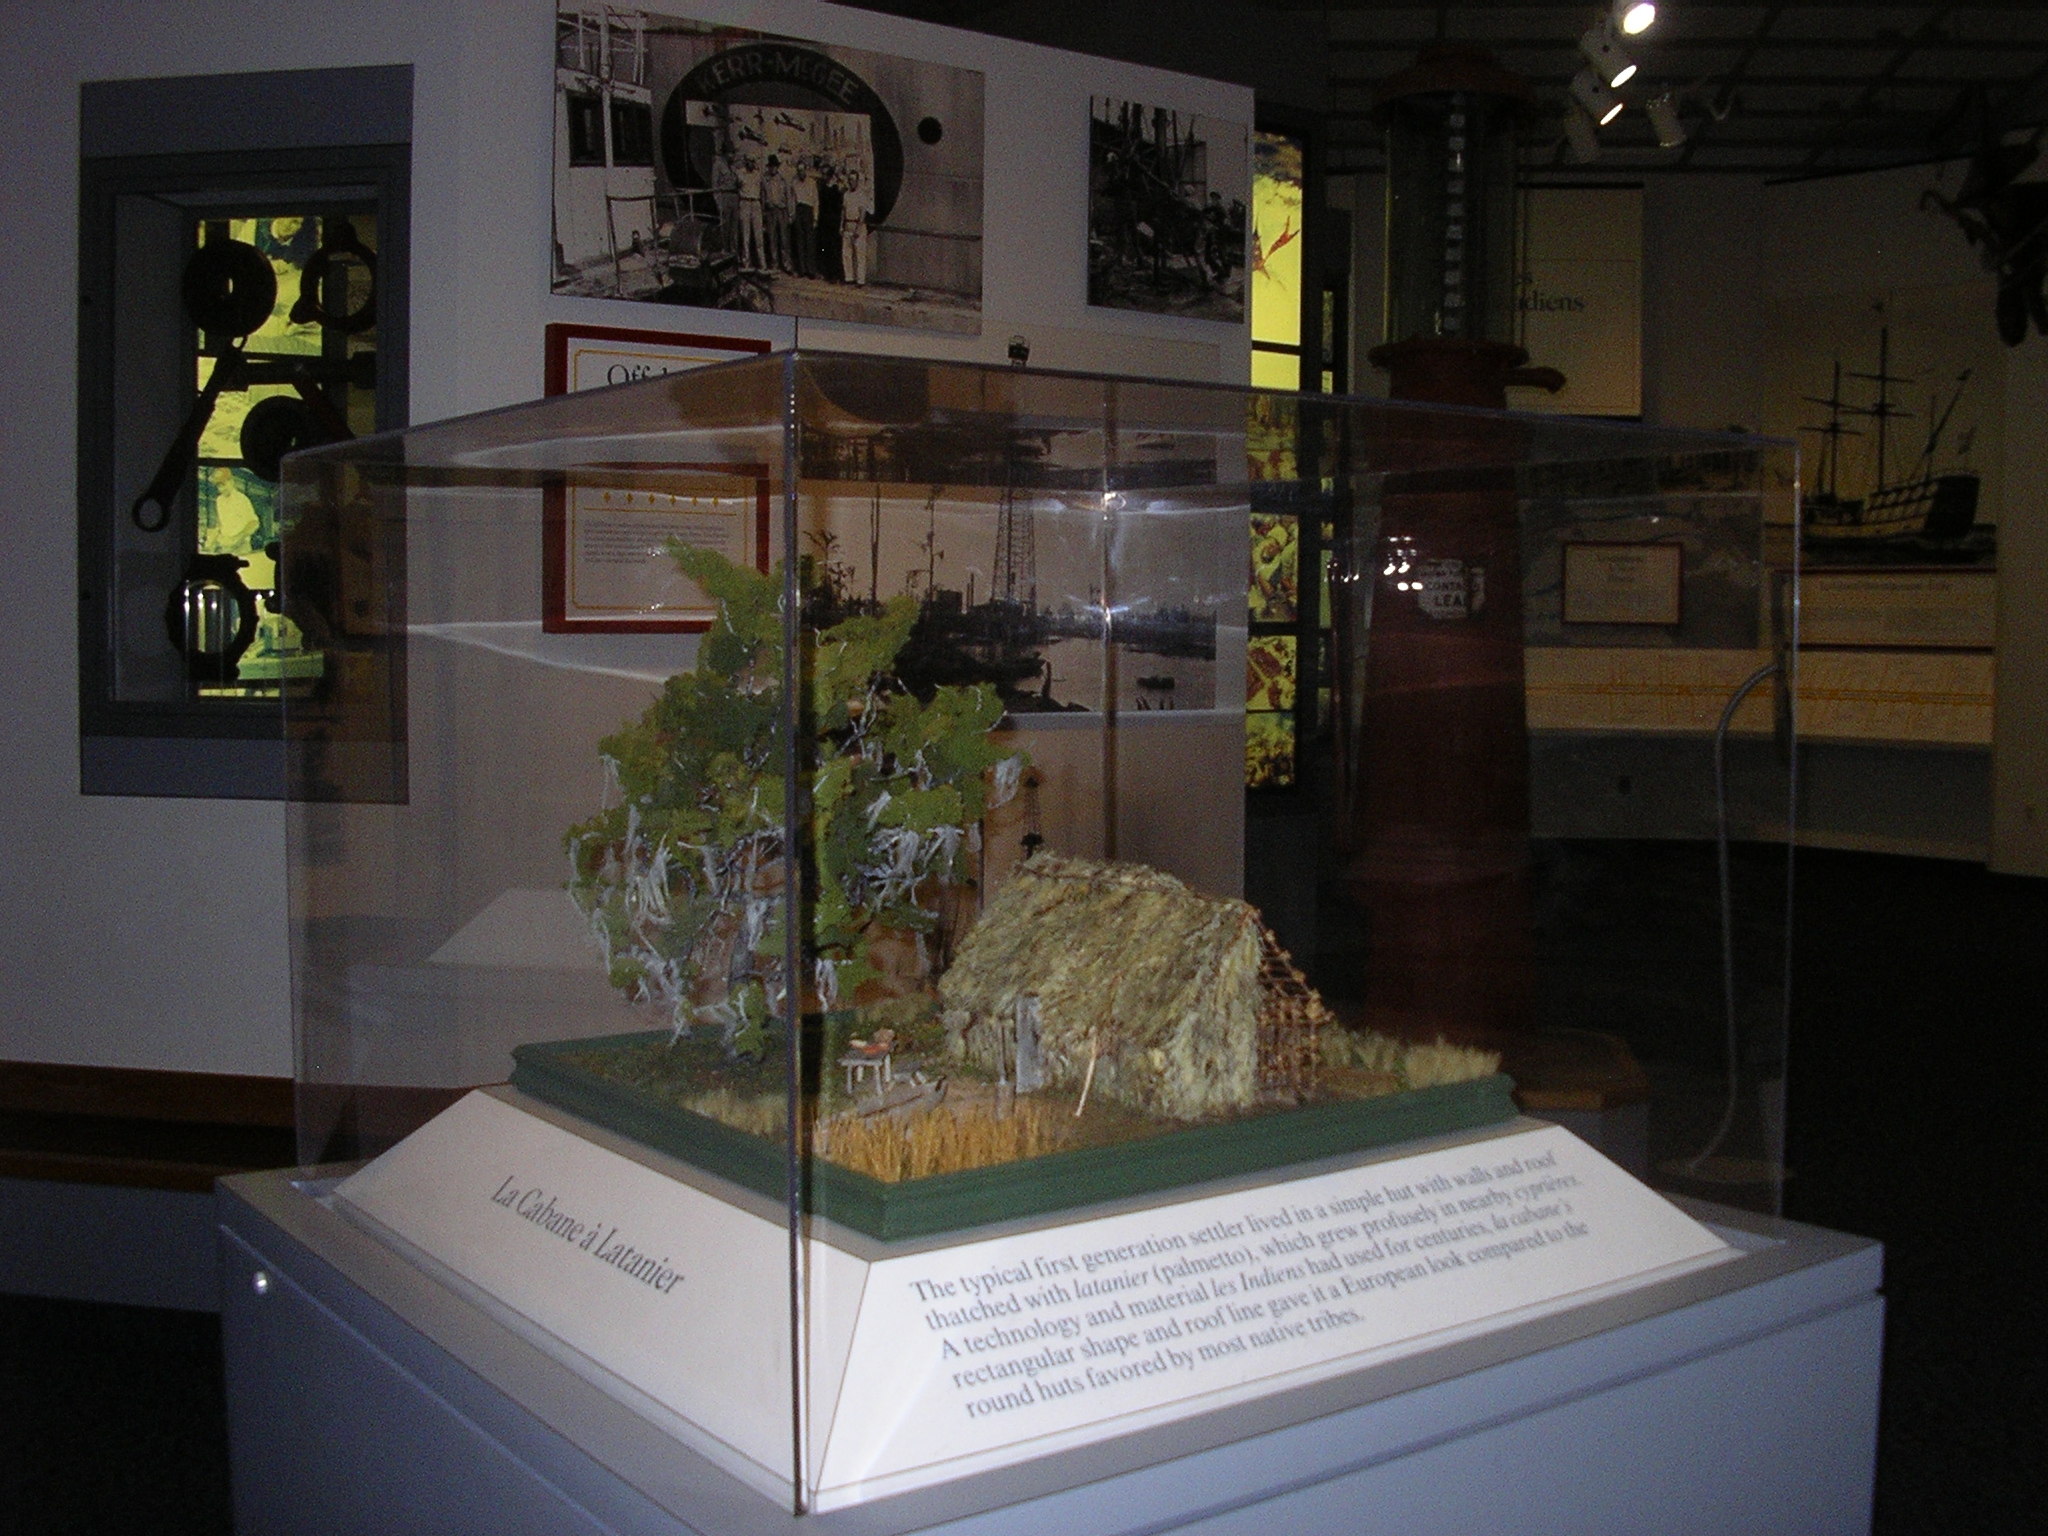 Model of an early Acadian home sits in a glass case